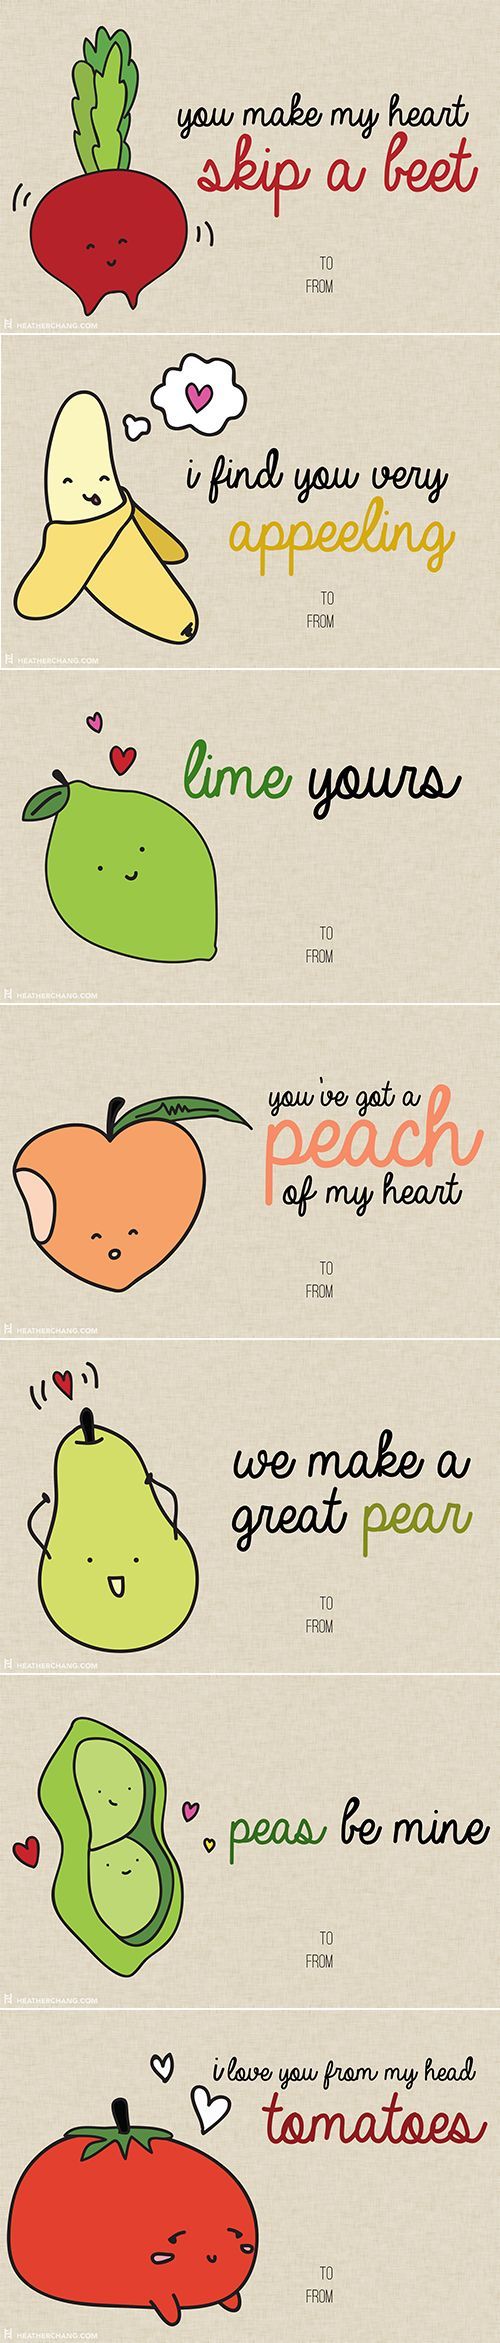 10 Printable V-Day Cards With Food Puns So Bad They’re Almost Good www.buzzfeed.